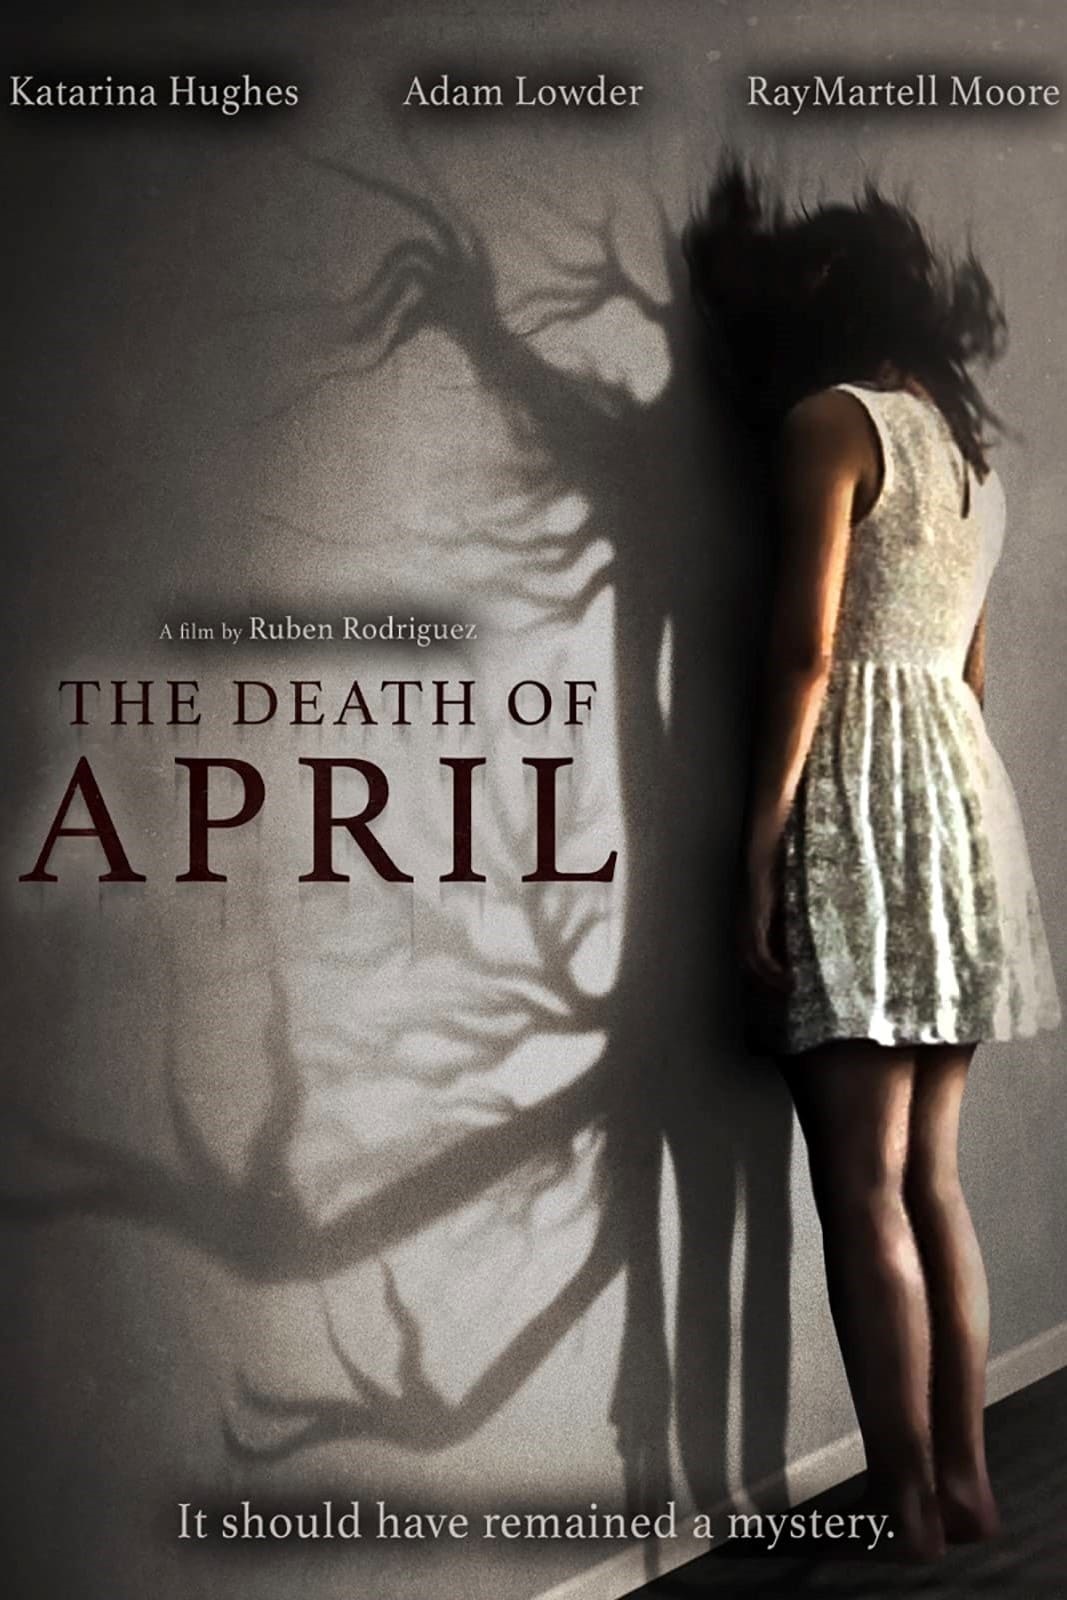 The Death of April (2012) 1080p mockumentary/found footage